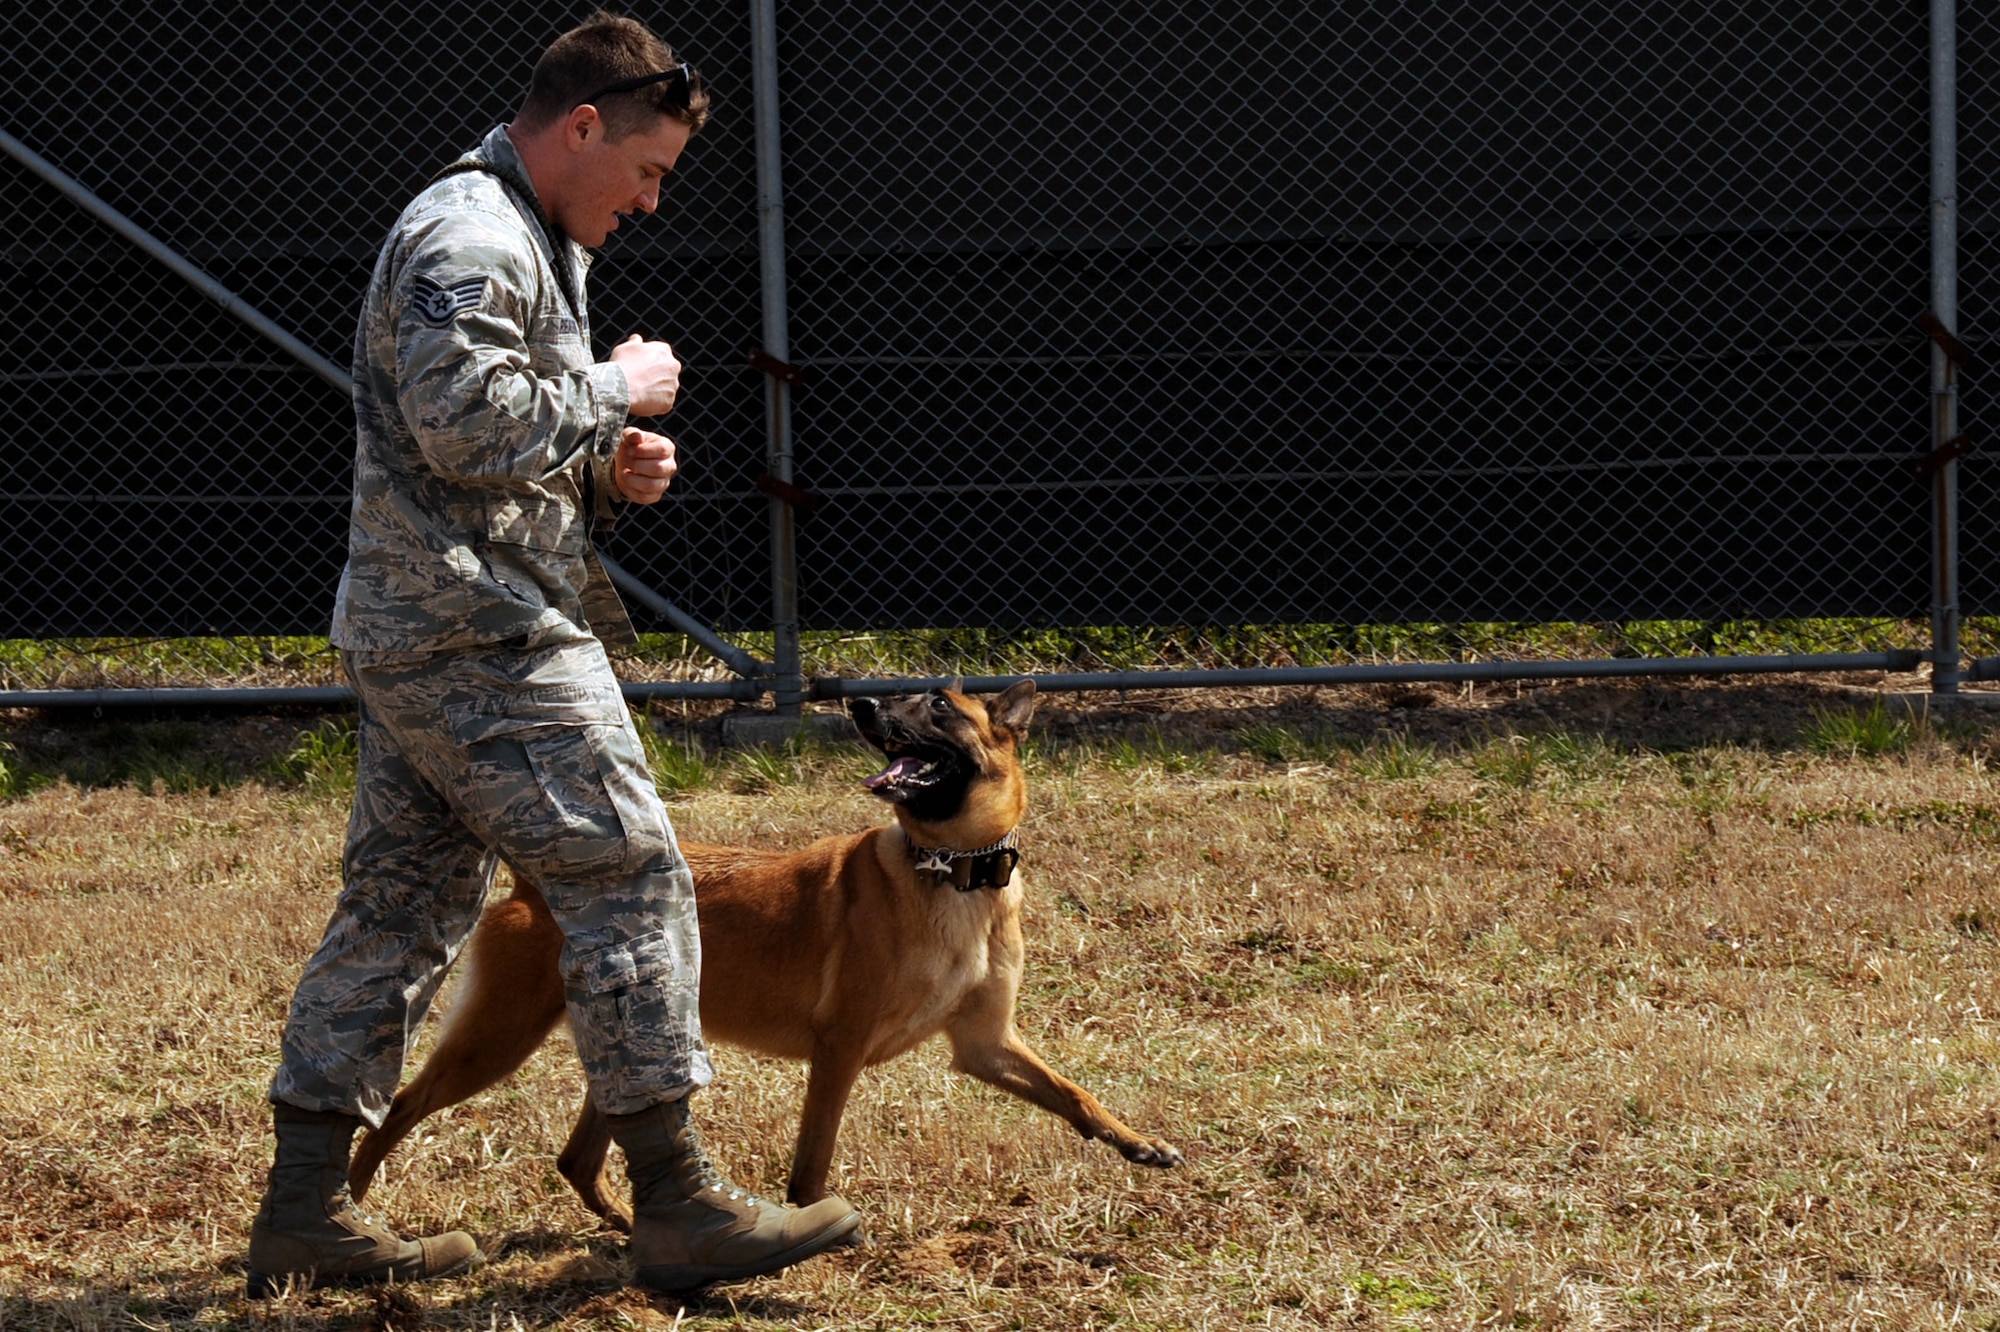 U.S. Air Force Staff Sgt. Aaron Reason, 8th Security Forces Squadron military working dog handler, takes a walk with Oovey, his assigned MWD while going through an obstacle course at Kunsan Air Base, Republic of Korea, Mar. 25, 2016. Kunsan has a total of 21 military working dogs here in the kennel. (U.S. Air Force photo by Senior Airman Ashley L. Gardner/Released)

